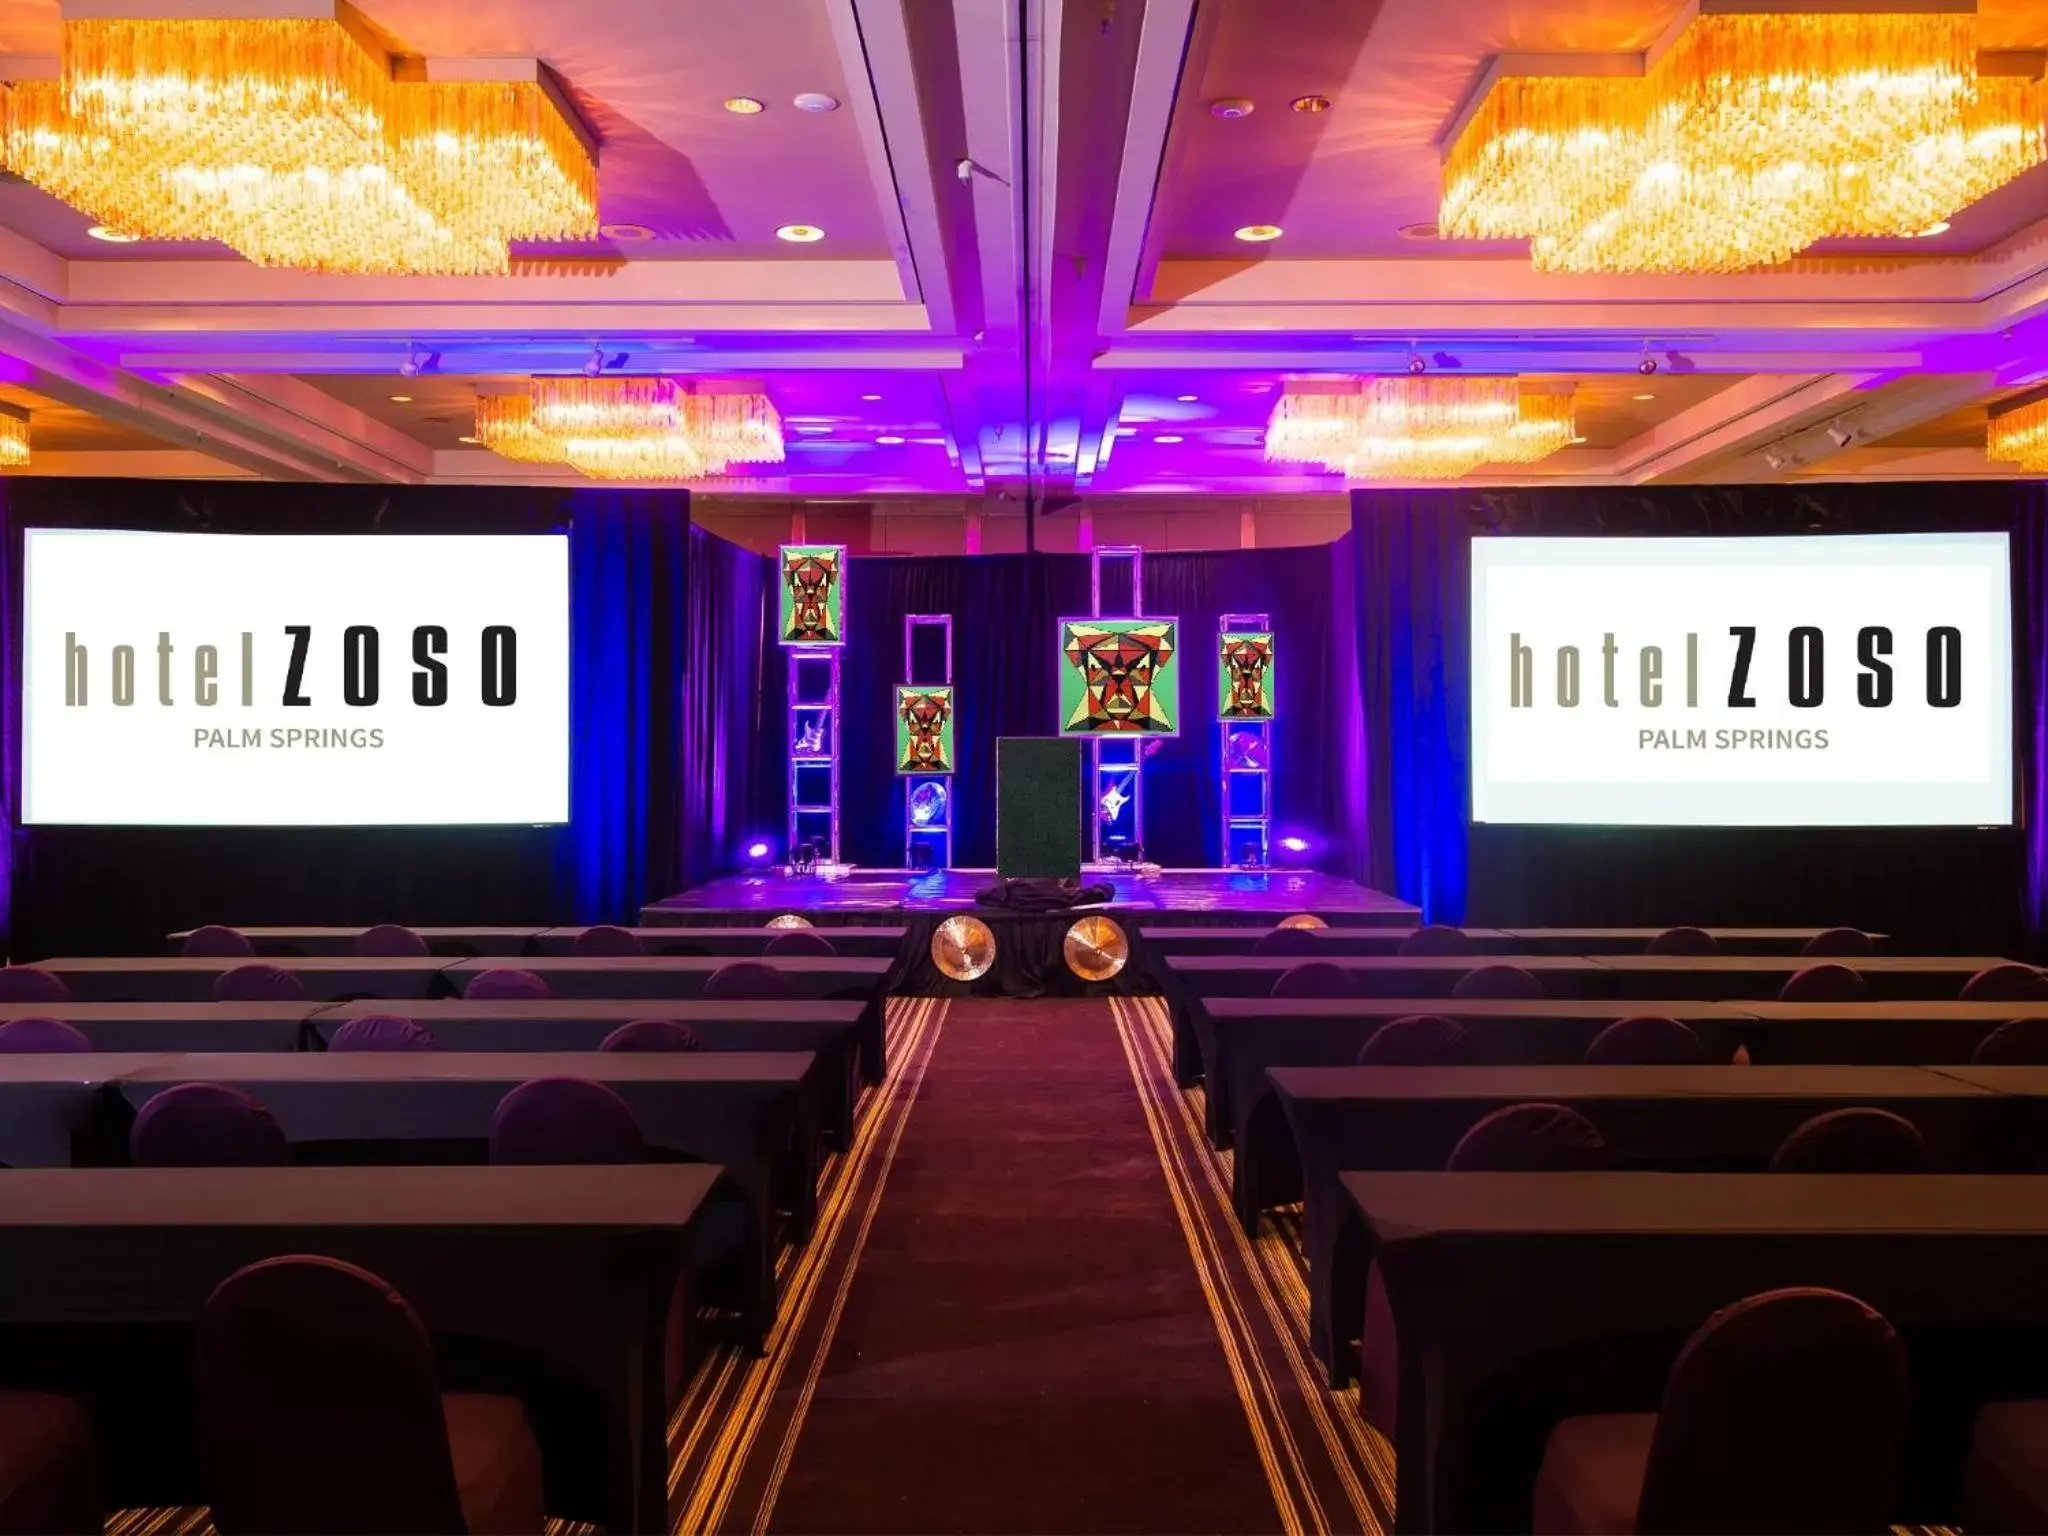 Business facilities in Hotel Zoso